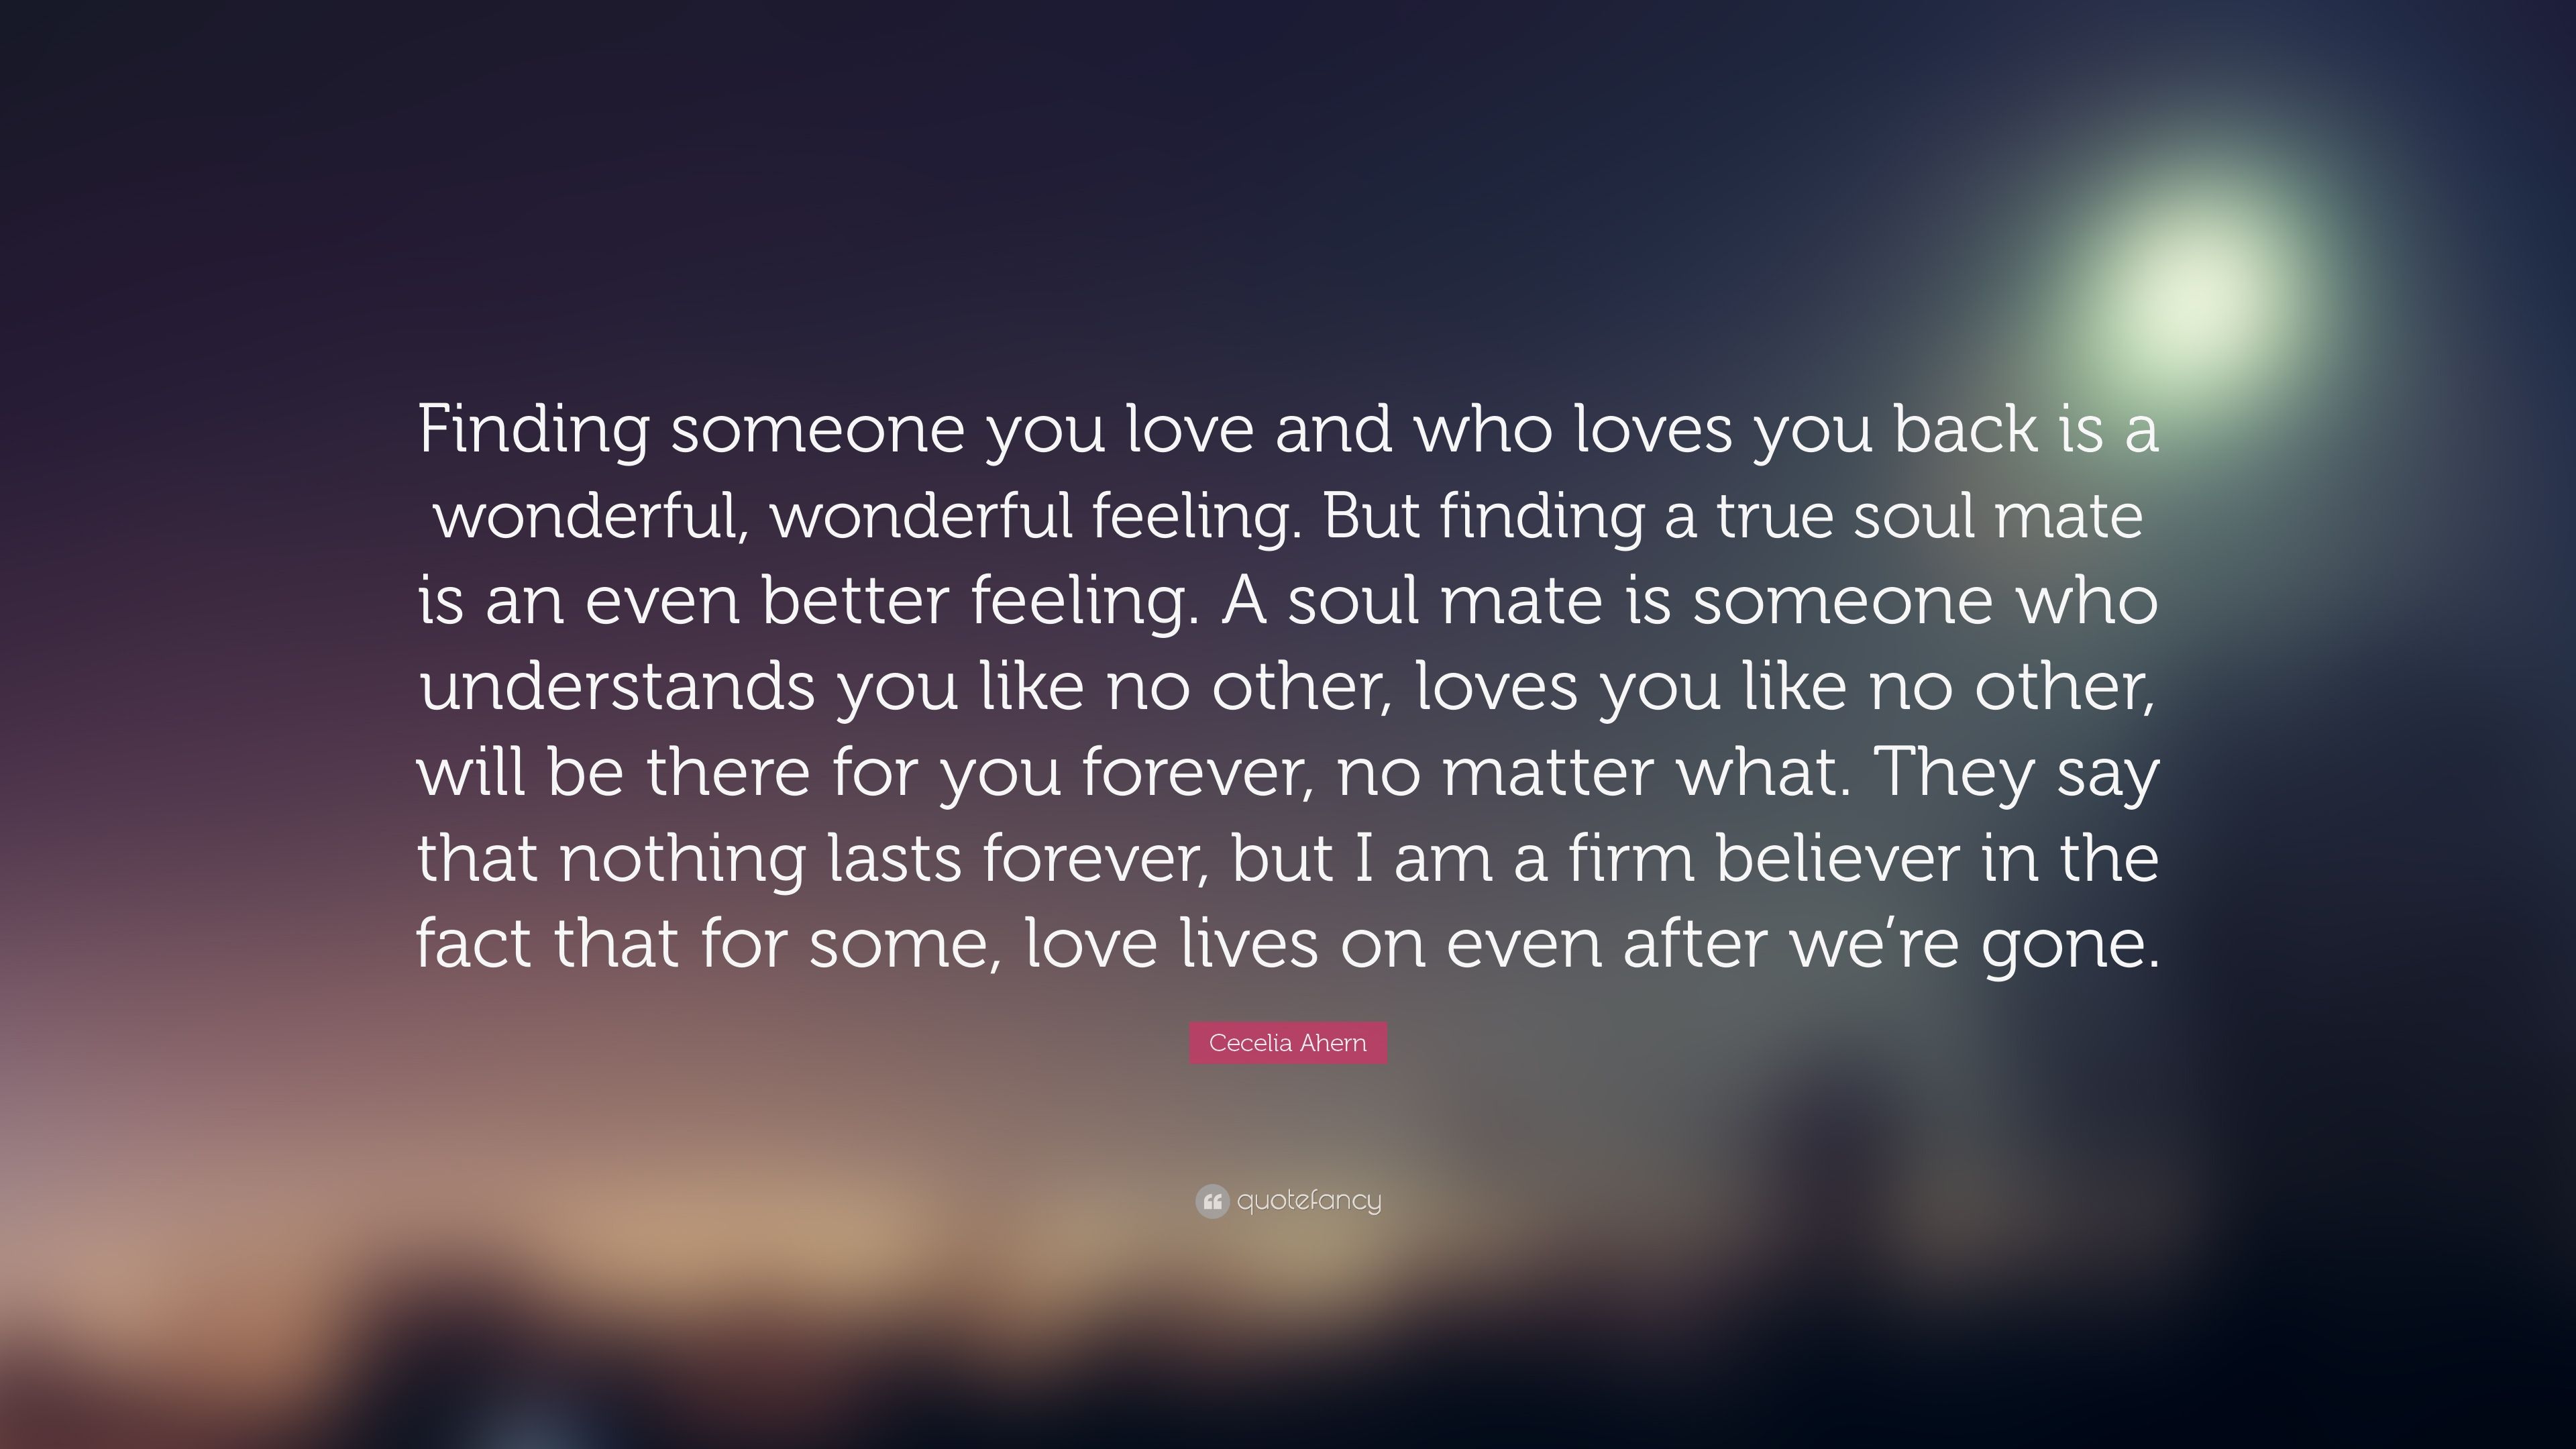 Cecelia Ahern Quote: “Finding someone you love and who loves you